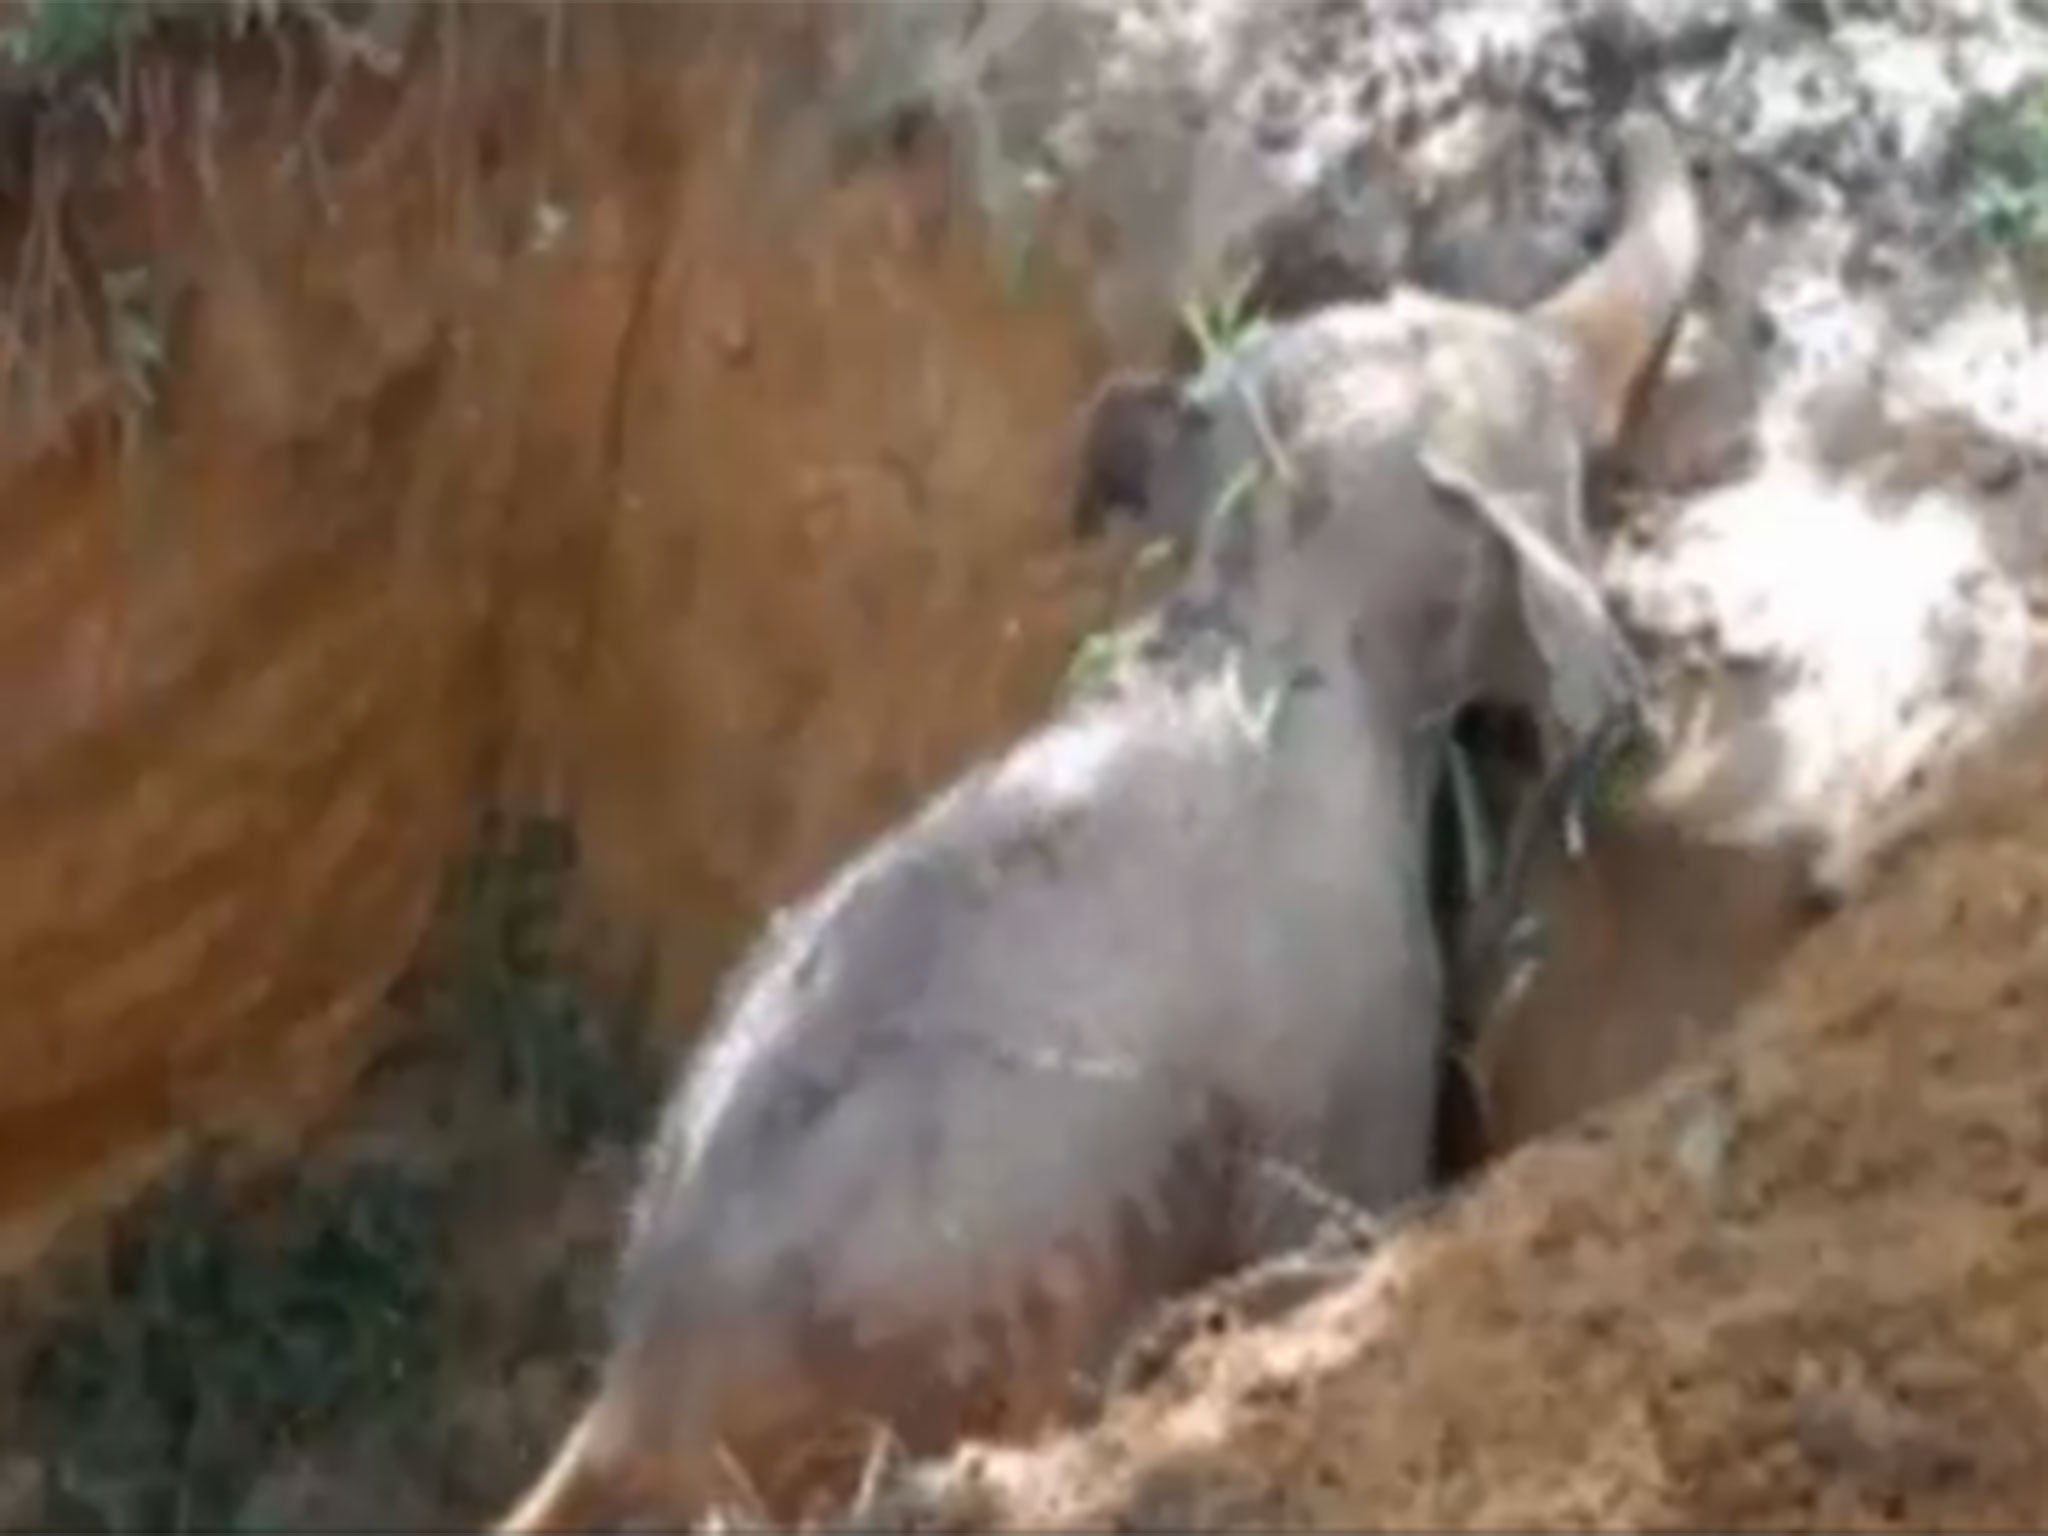 The elephant was believed to have been trapped for 24 hours